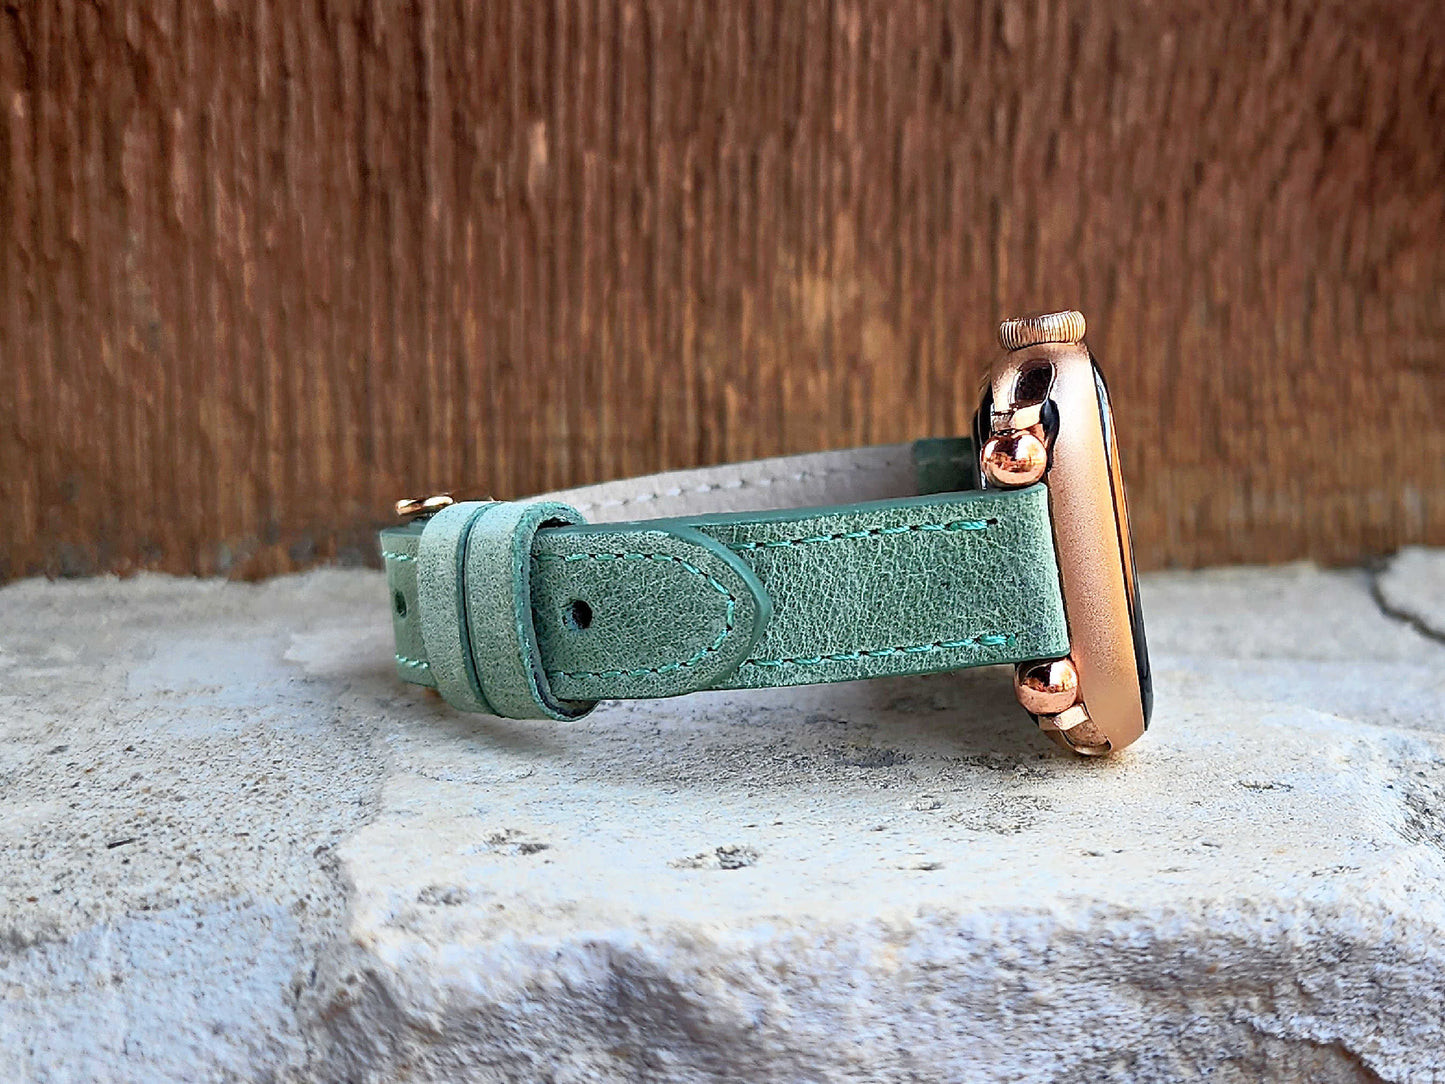 Green Genuine Leather Watch Band for Apple Watch and Fitbit Watches